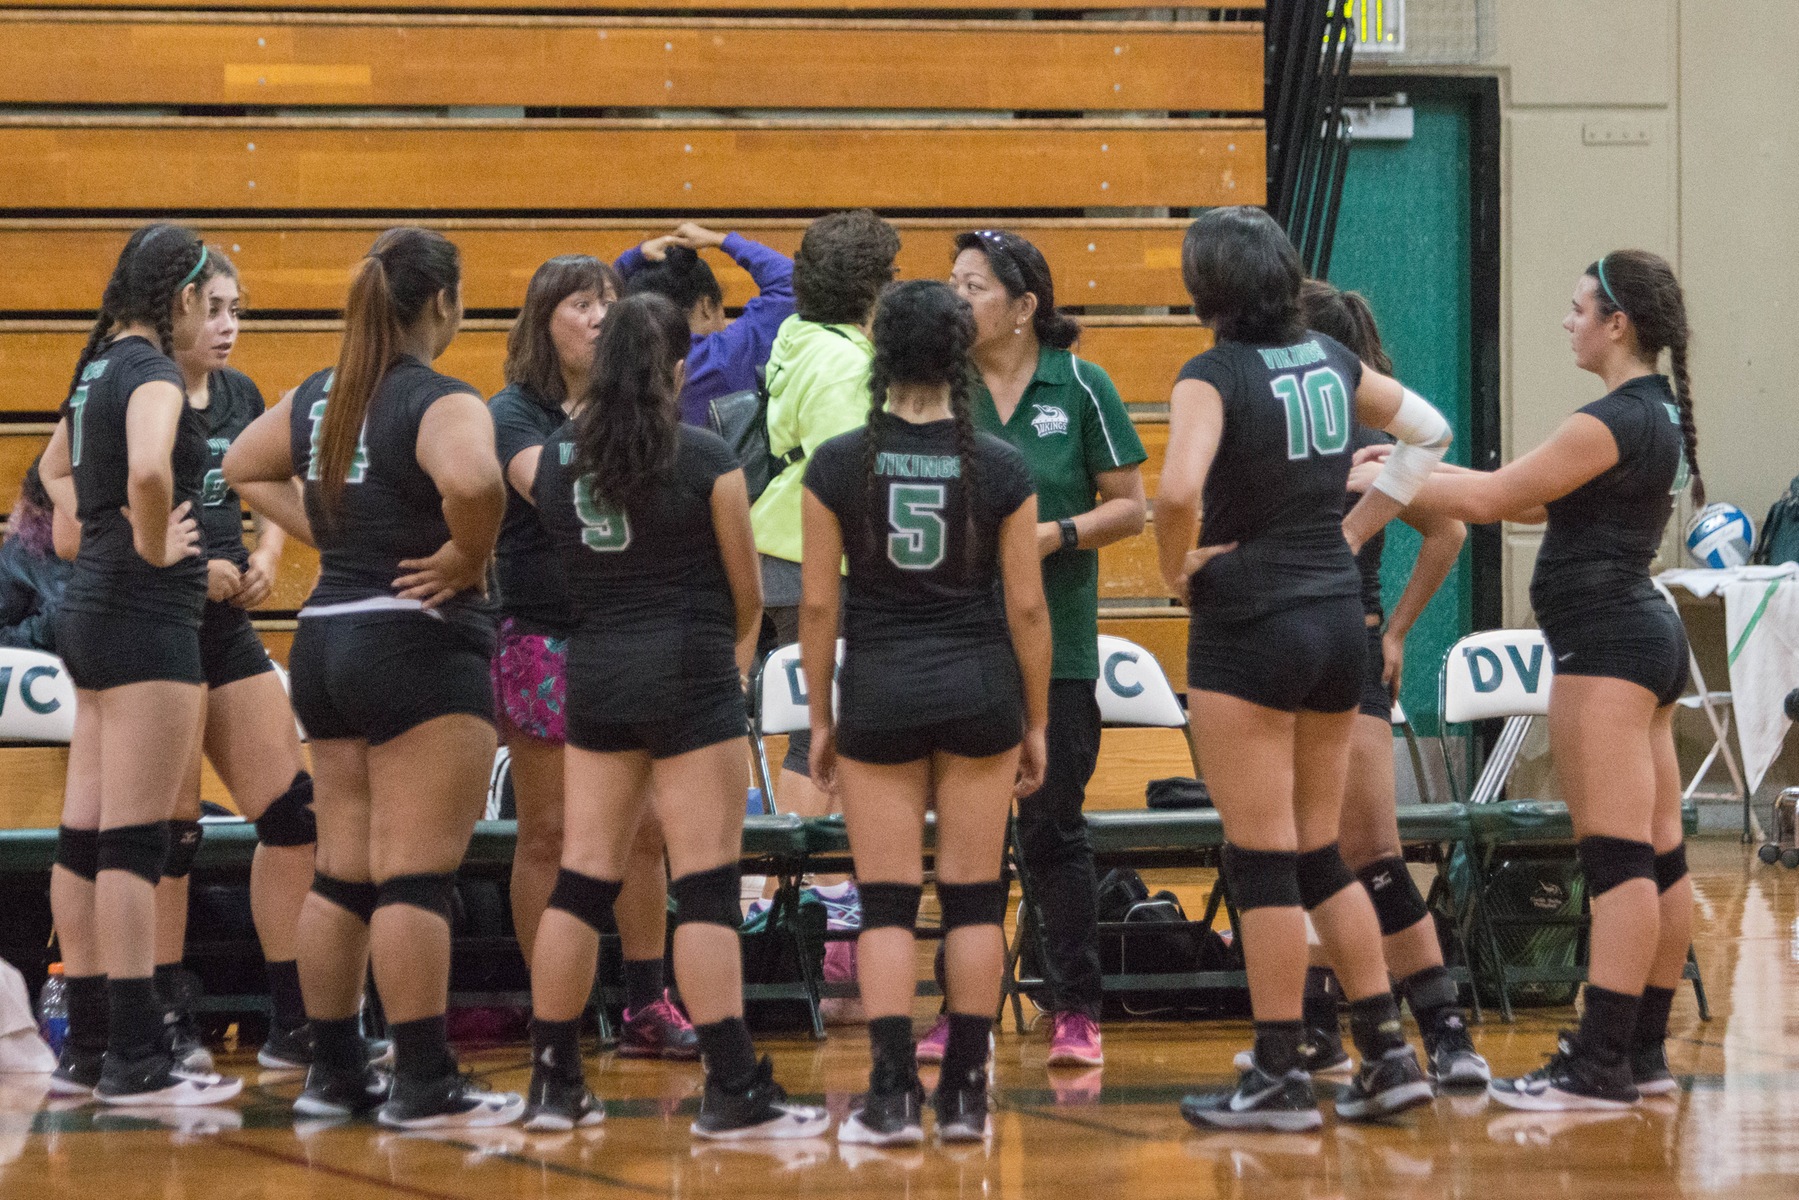 Women's Volleyball goes 1-3 in opening week